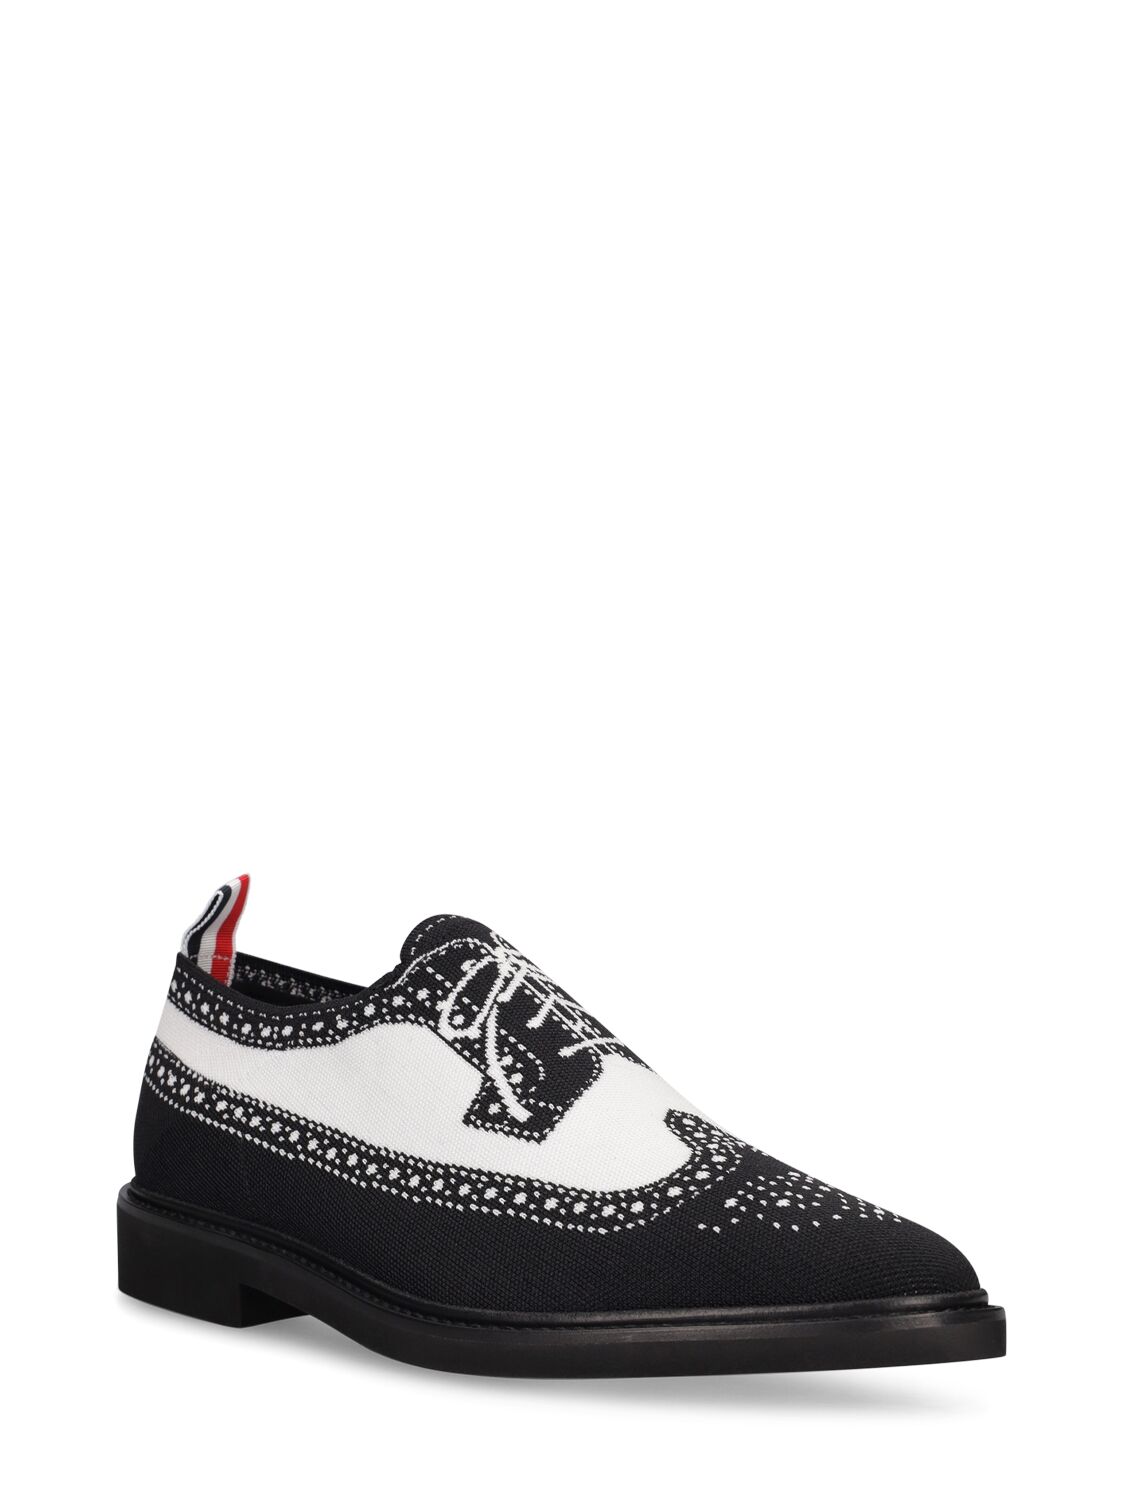 Thom Browne Longwing Brogue Loafers In Trompe L'oeil Knit In White